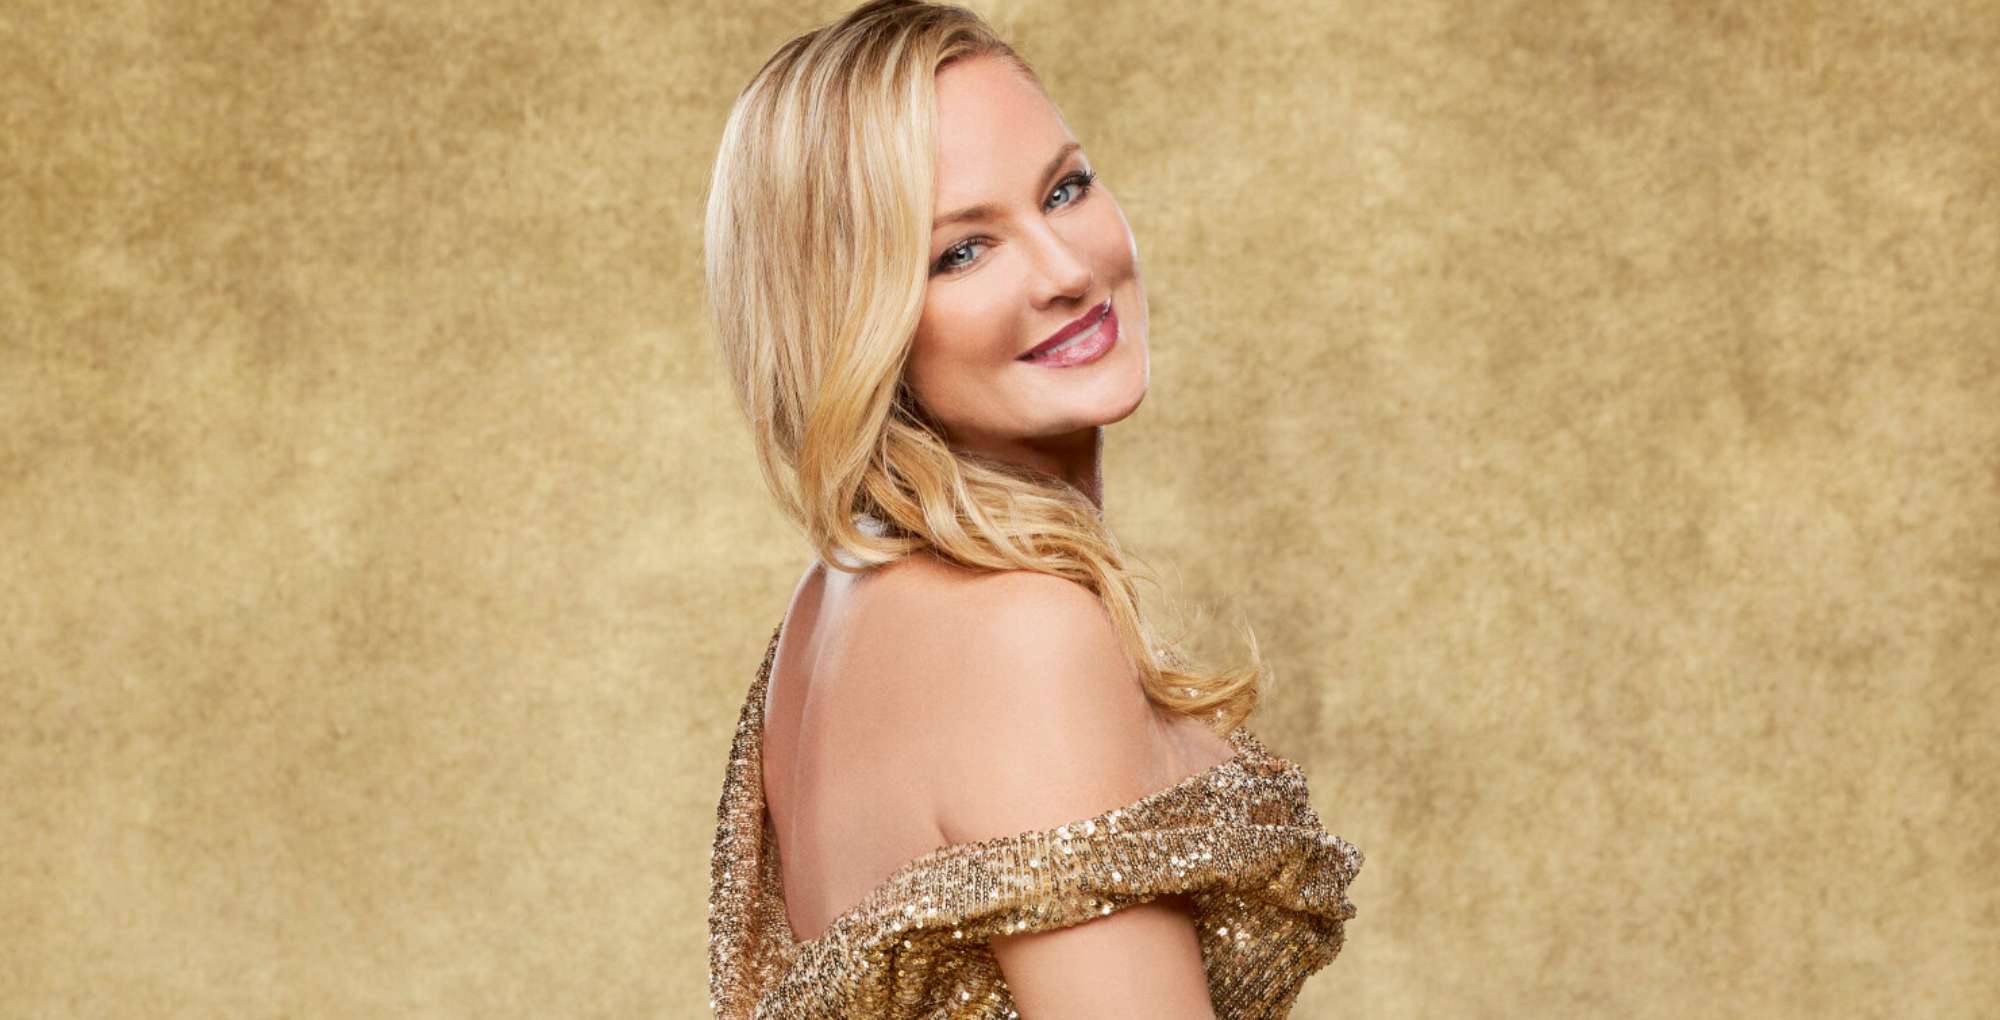 sharon case in sharon newman on the young and the restless.